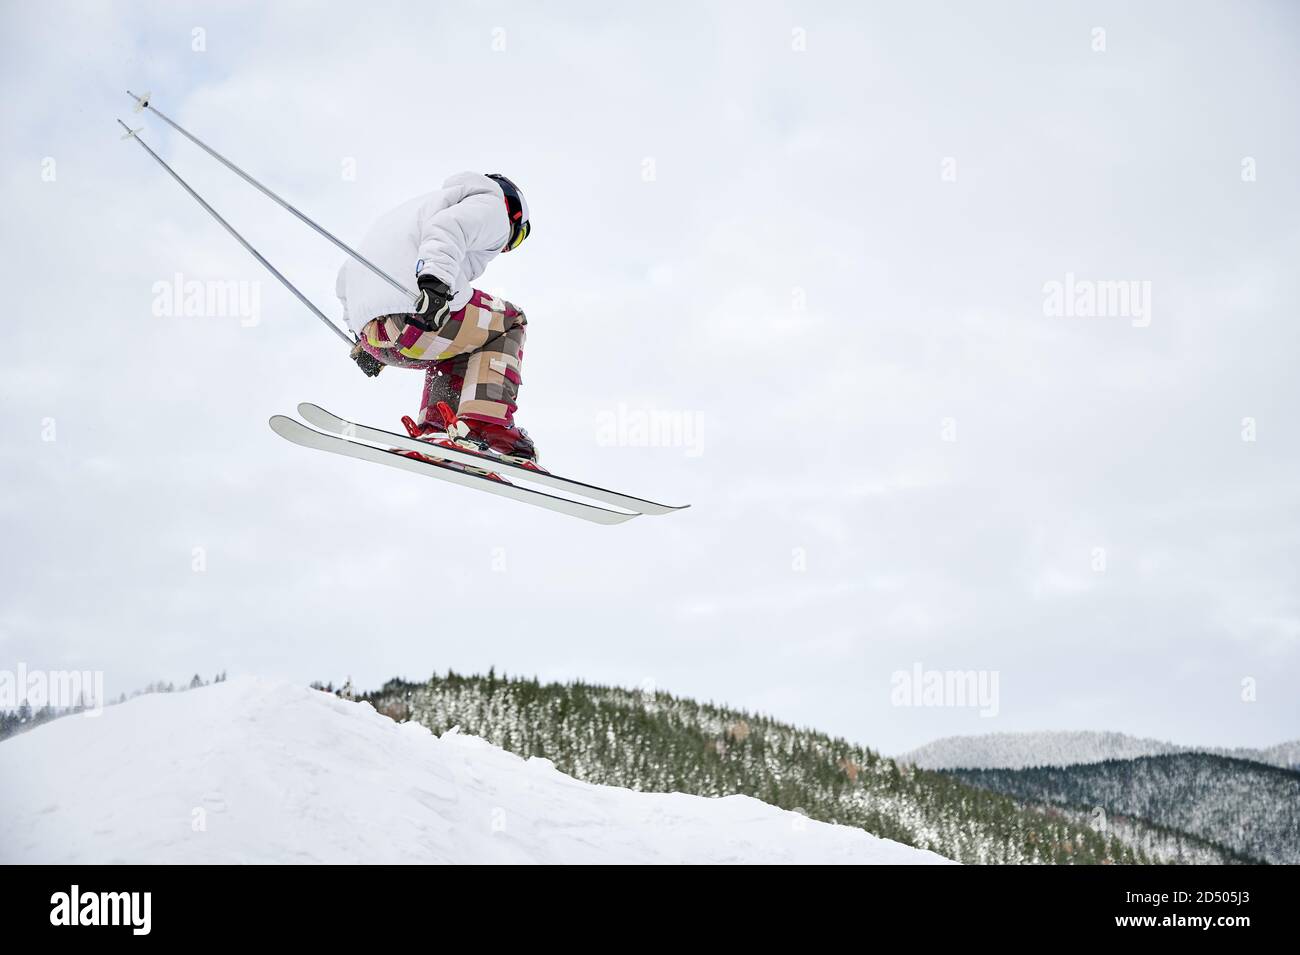 Horizontal Snapshot Of Spectacular Freeriding Fly At The Steep Slopes By Skier Cool Ski Jump From